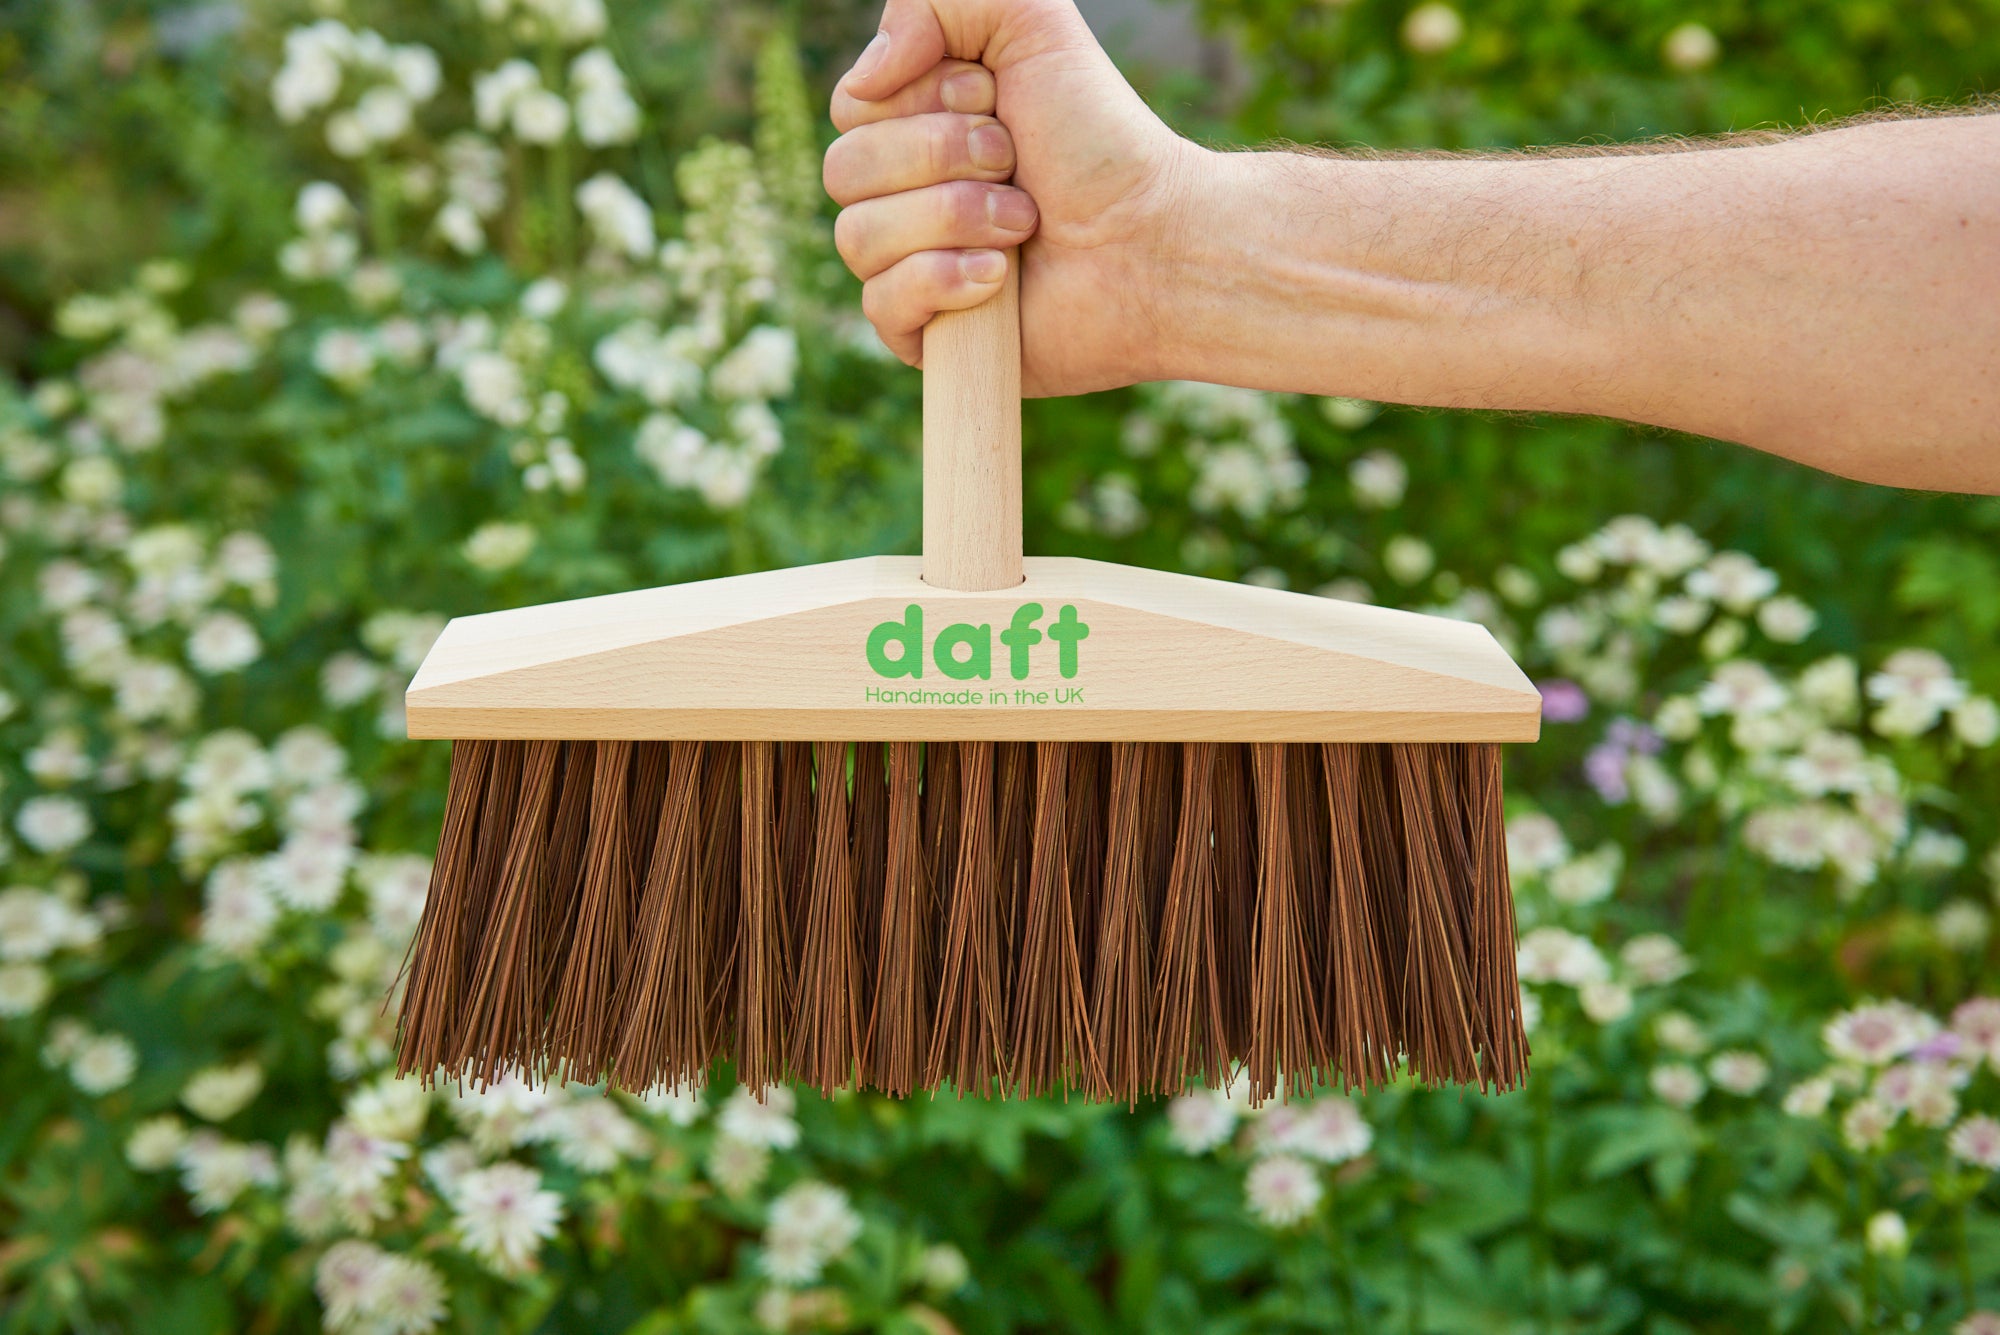 Picture of Daft broom in fist like grip to illustrate its strength